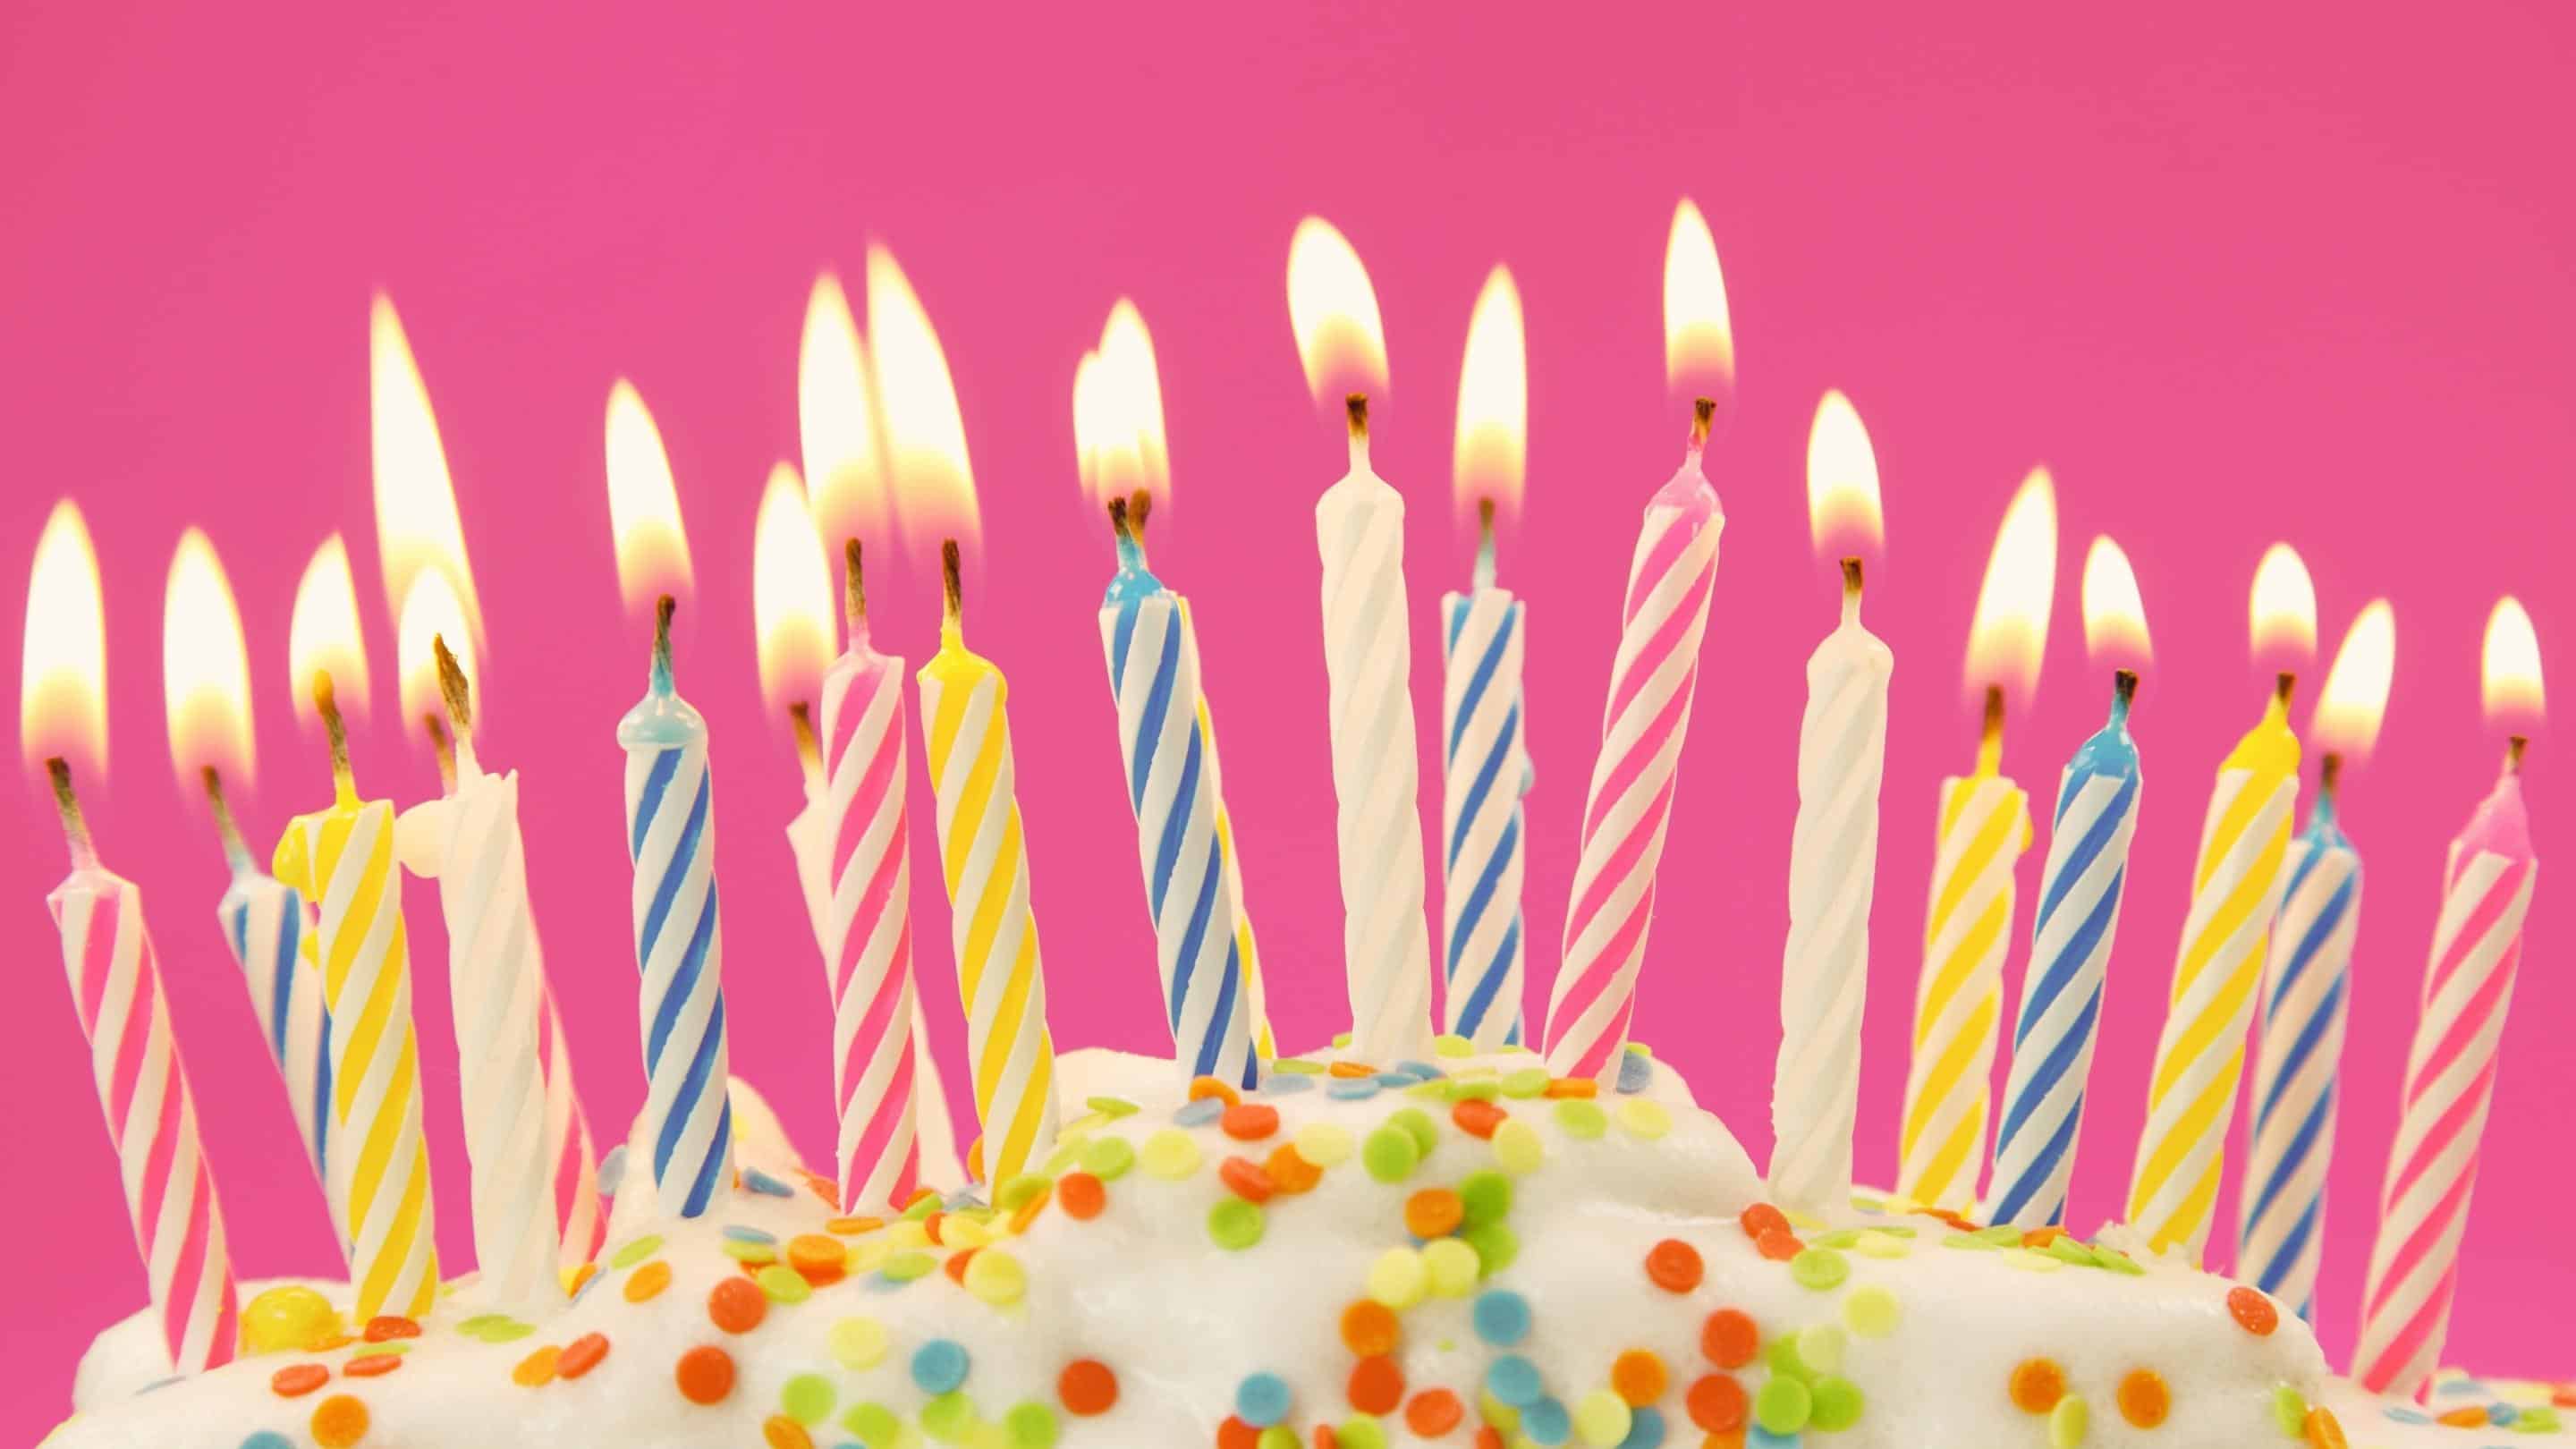 Colorful birthday cake with numerous candles lit on a pink background.